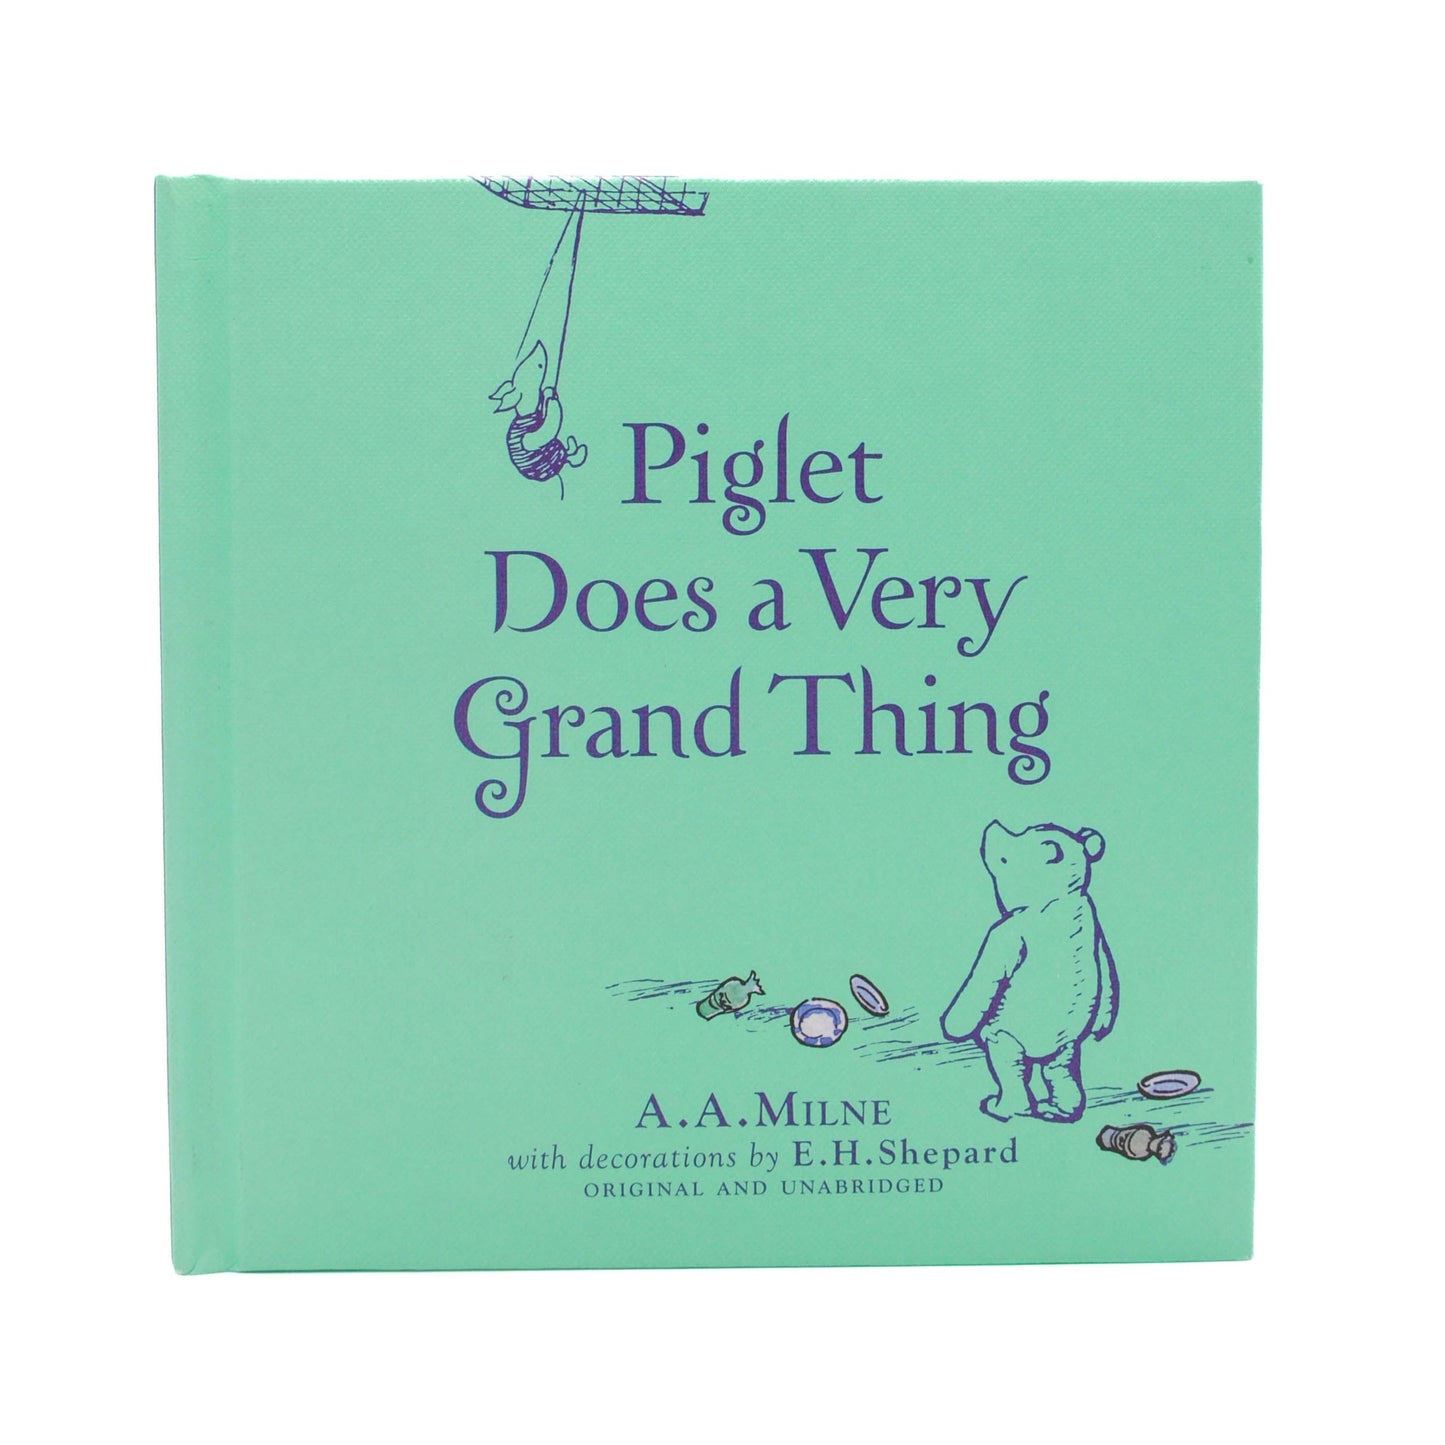 Piglet Does a Very Grand Thing: Special Gift Edition of the Original Illustrated Story by A.A.Milne